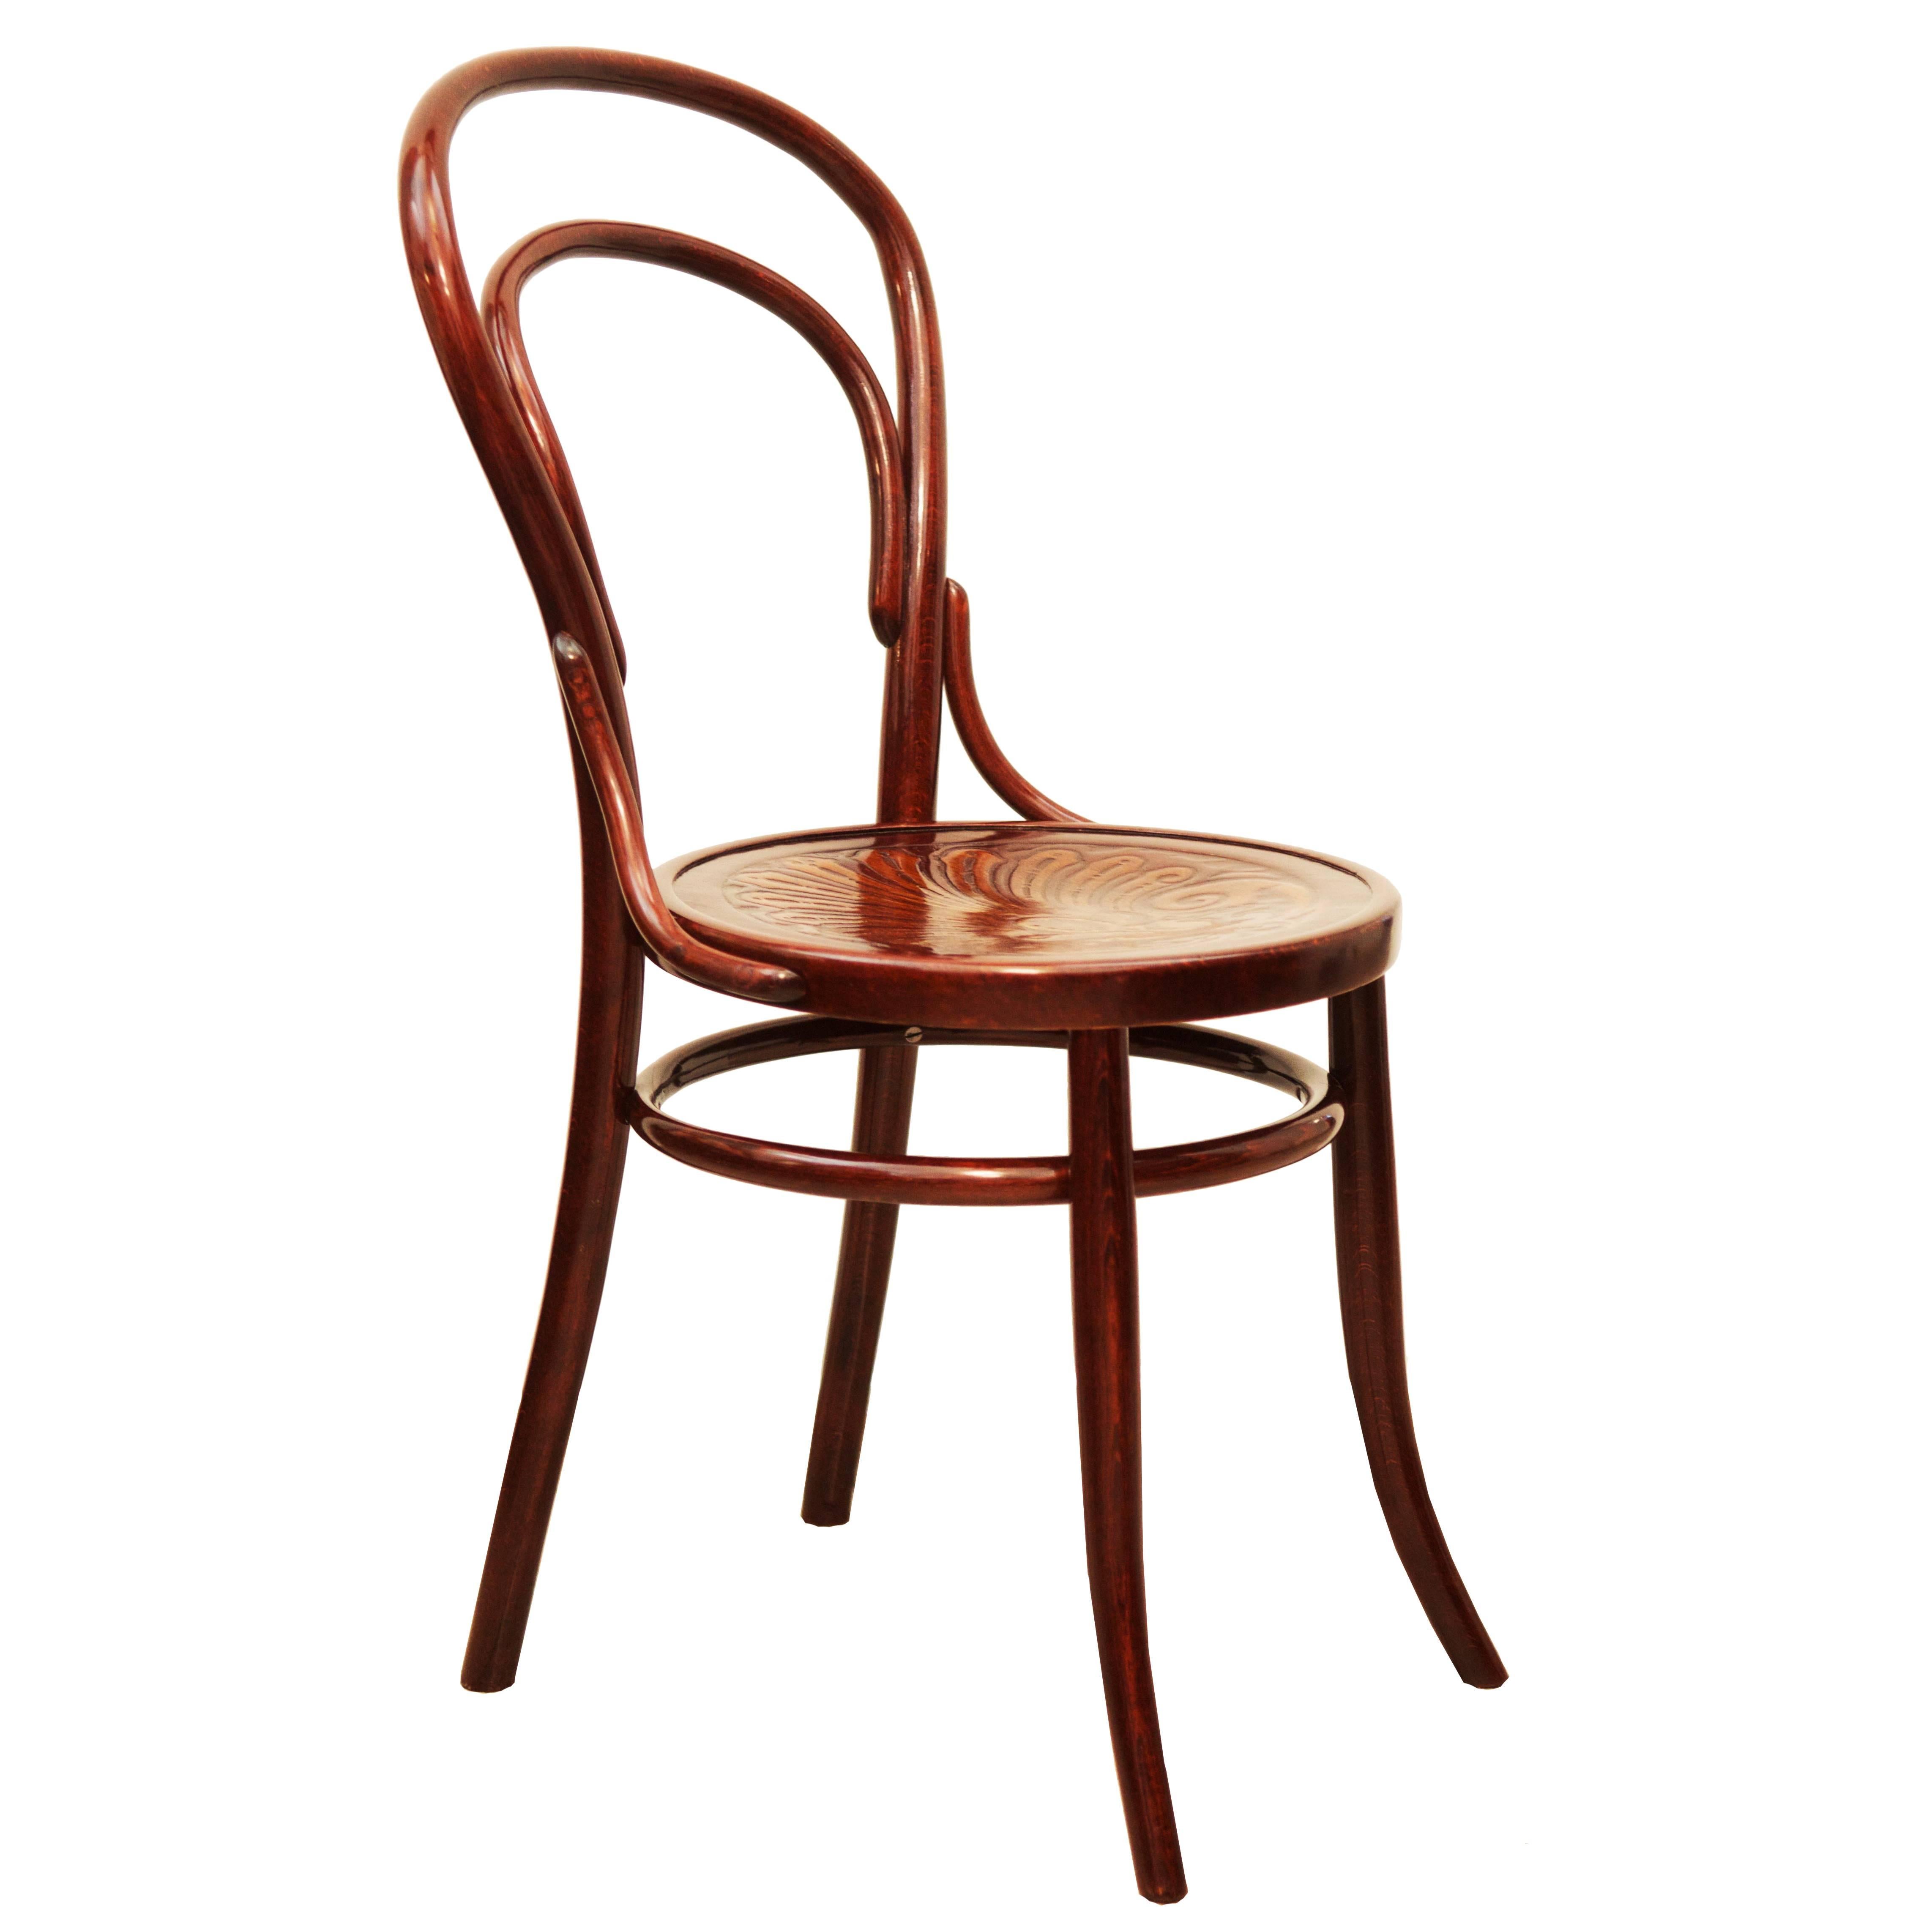 Thonet Bentwood B-9 Chair By Michael Thonet, Manufactured By Jacob ...